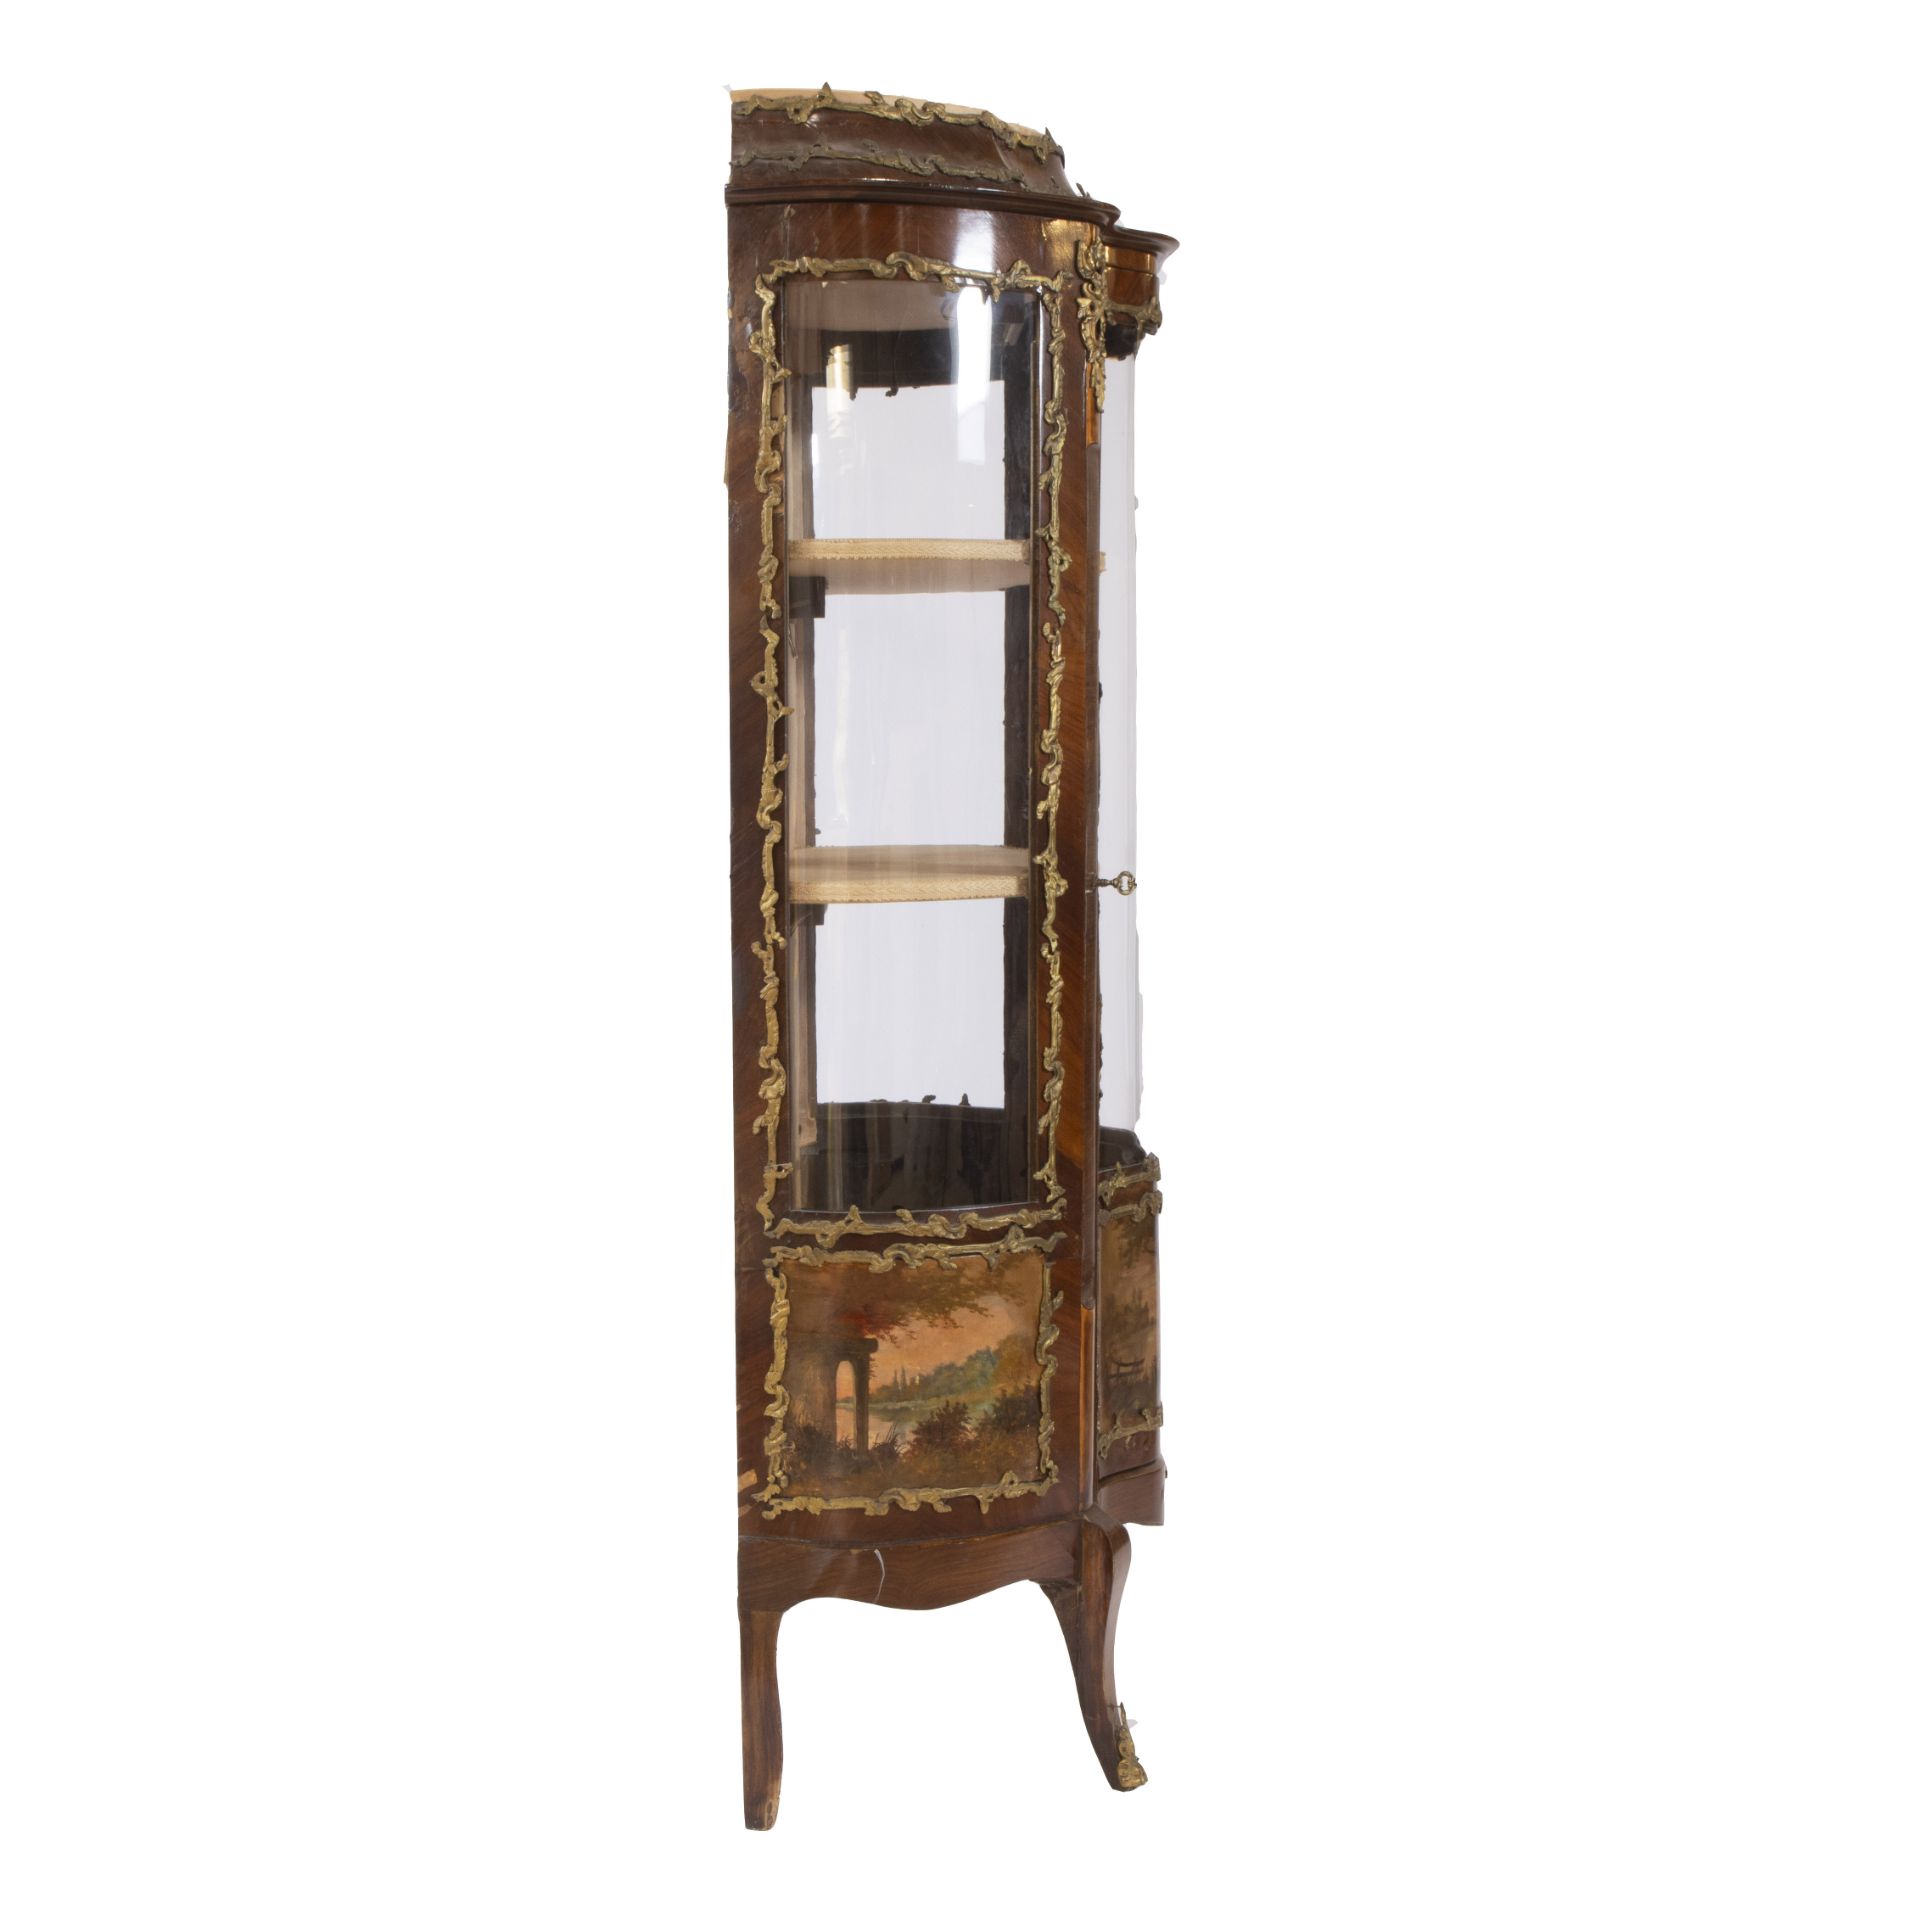 Louis XV style display case with curved glass and bronze mounts, decorated with a romantic decor - Image 2 of 3